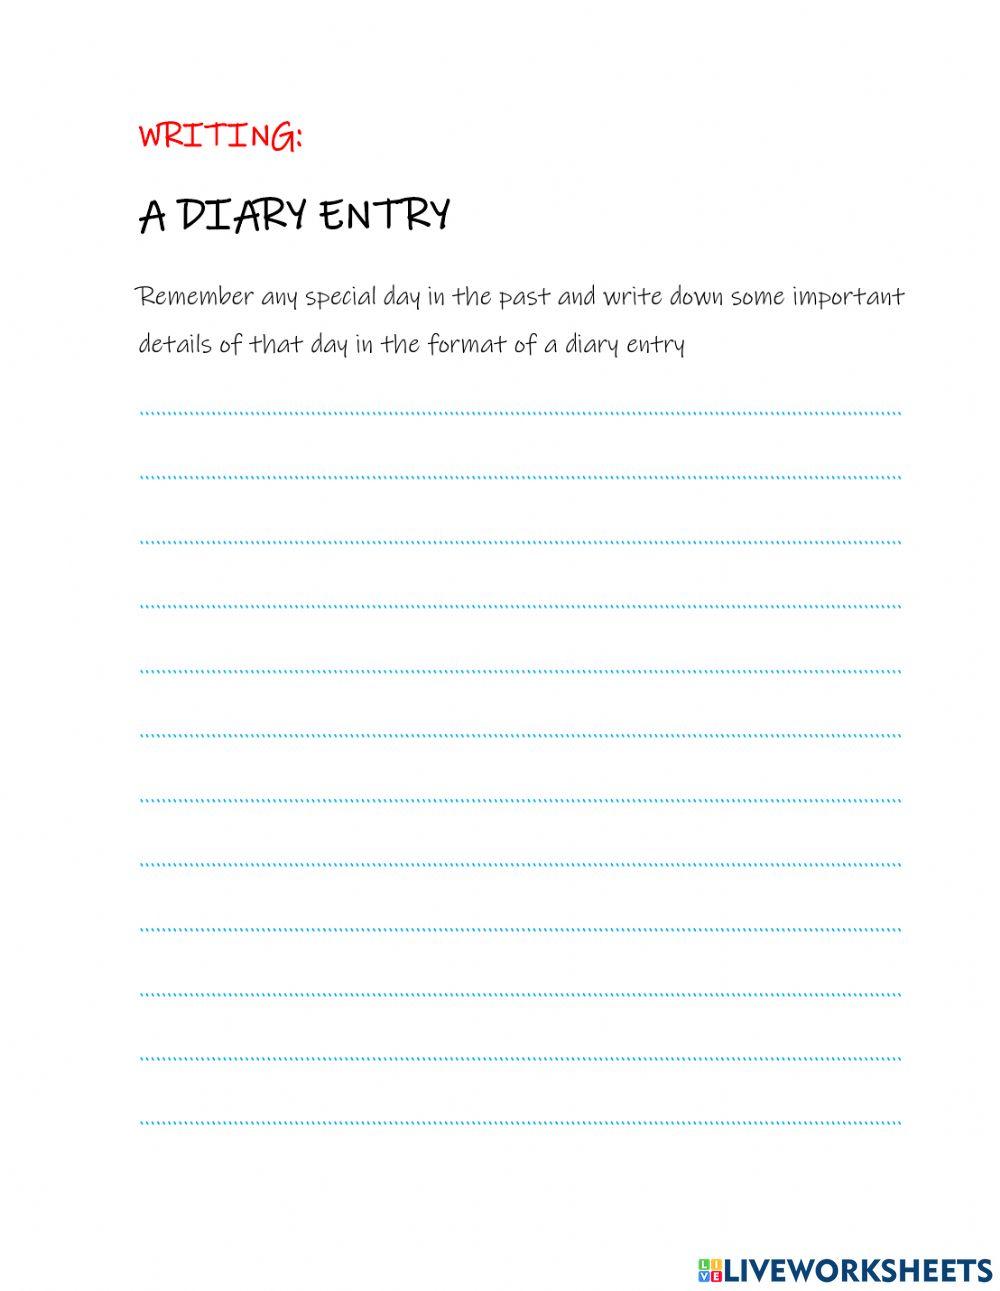 Writing a diary entry